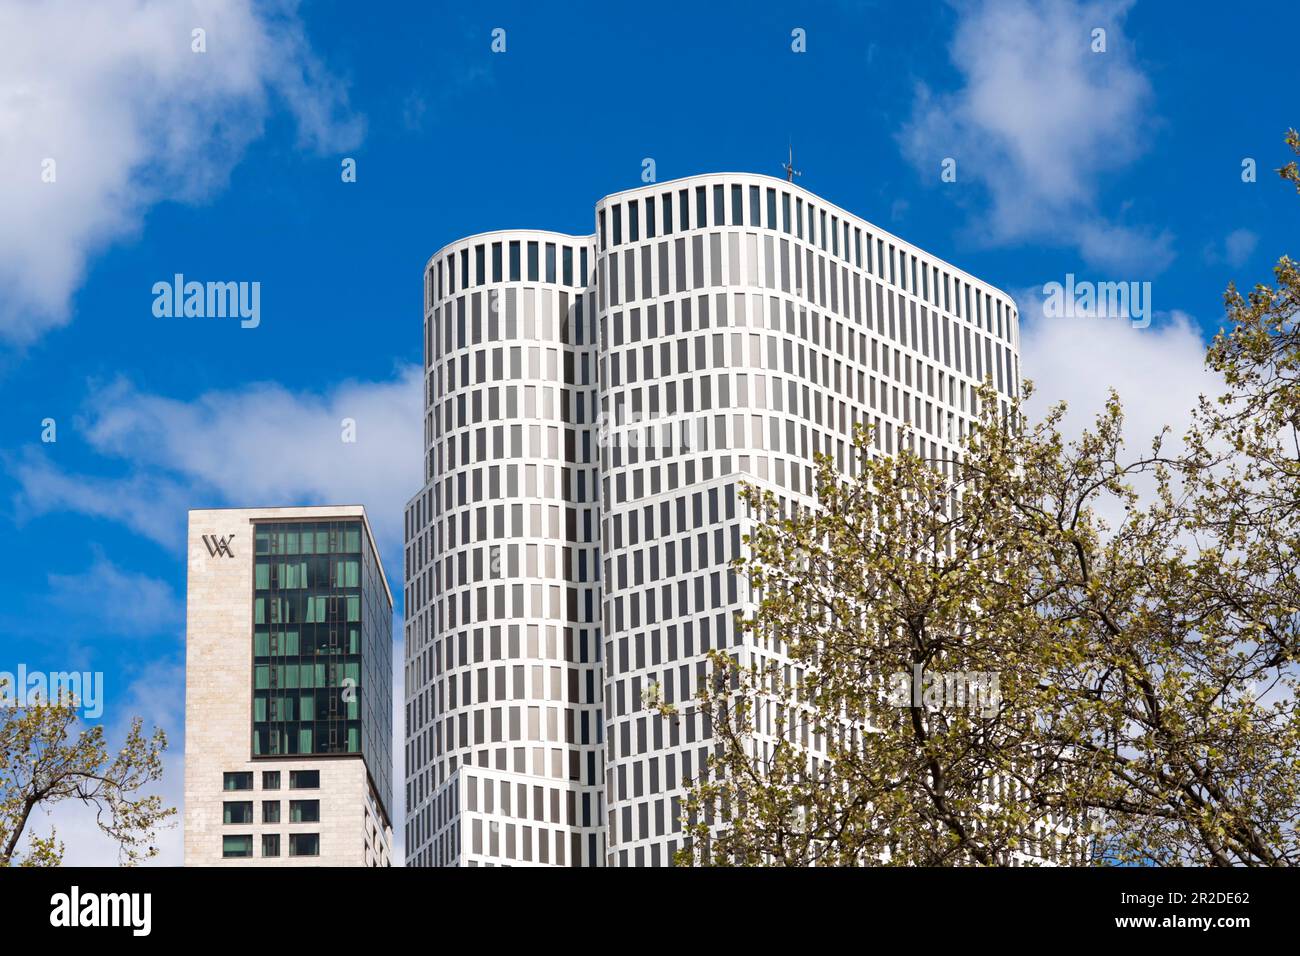 Hotels Upper West and Waldorf Astoria in Berlin, Germany Stock Photo